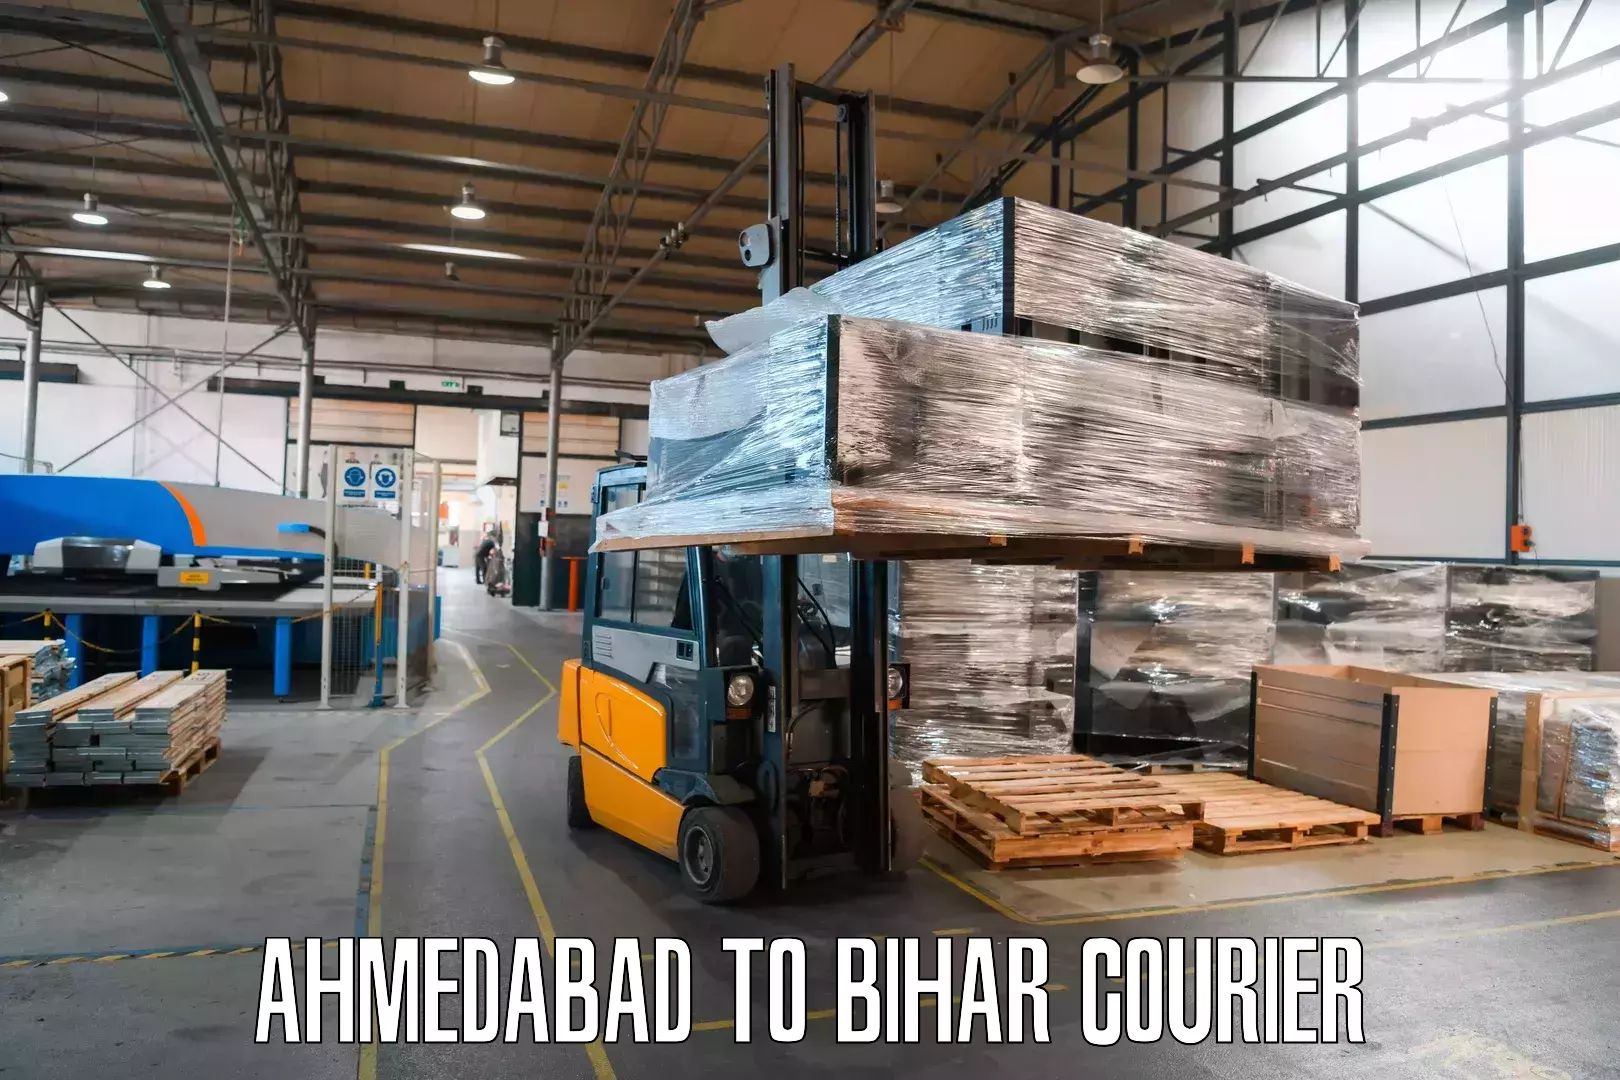 User-friendly courier app Ahmedabad to Bihar